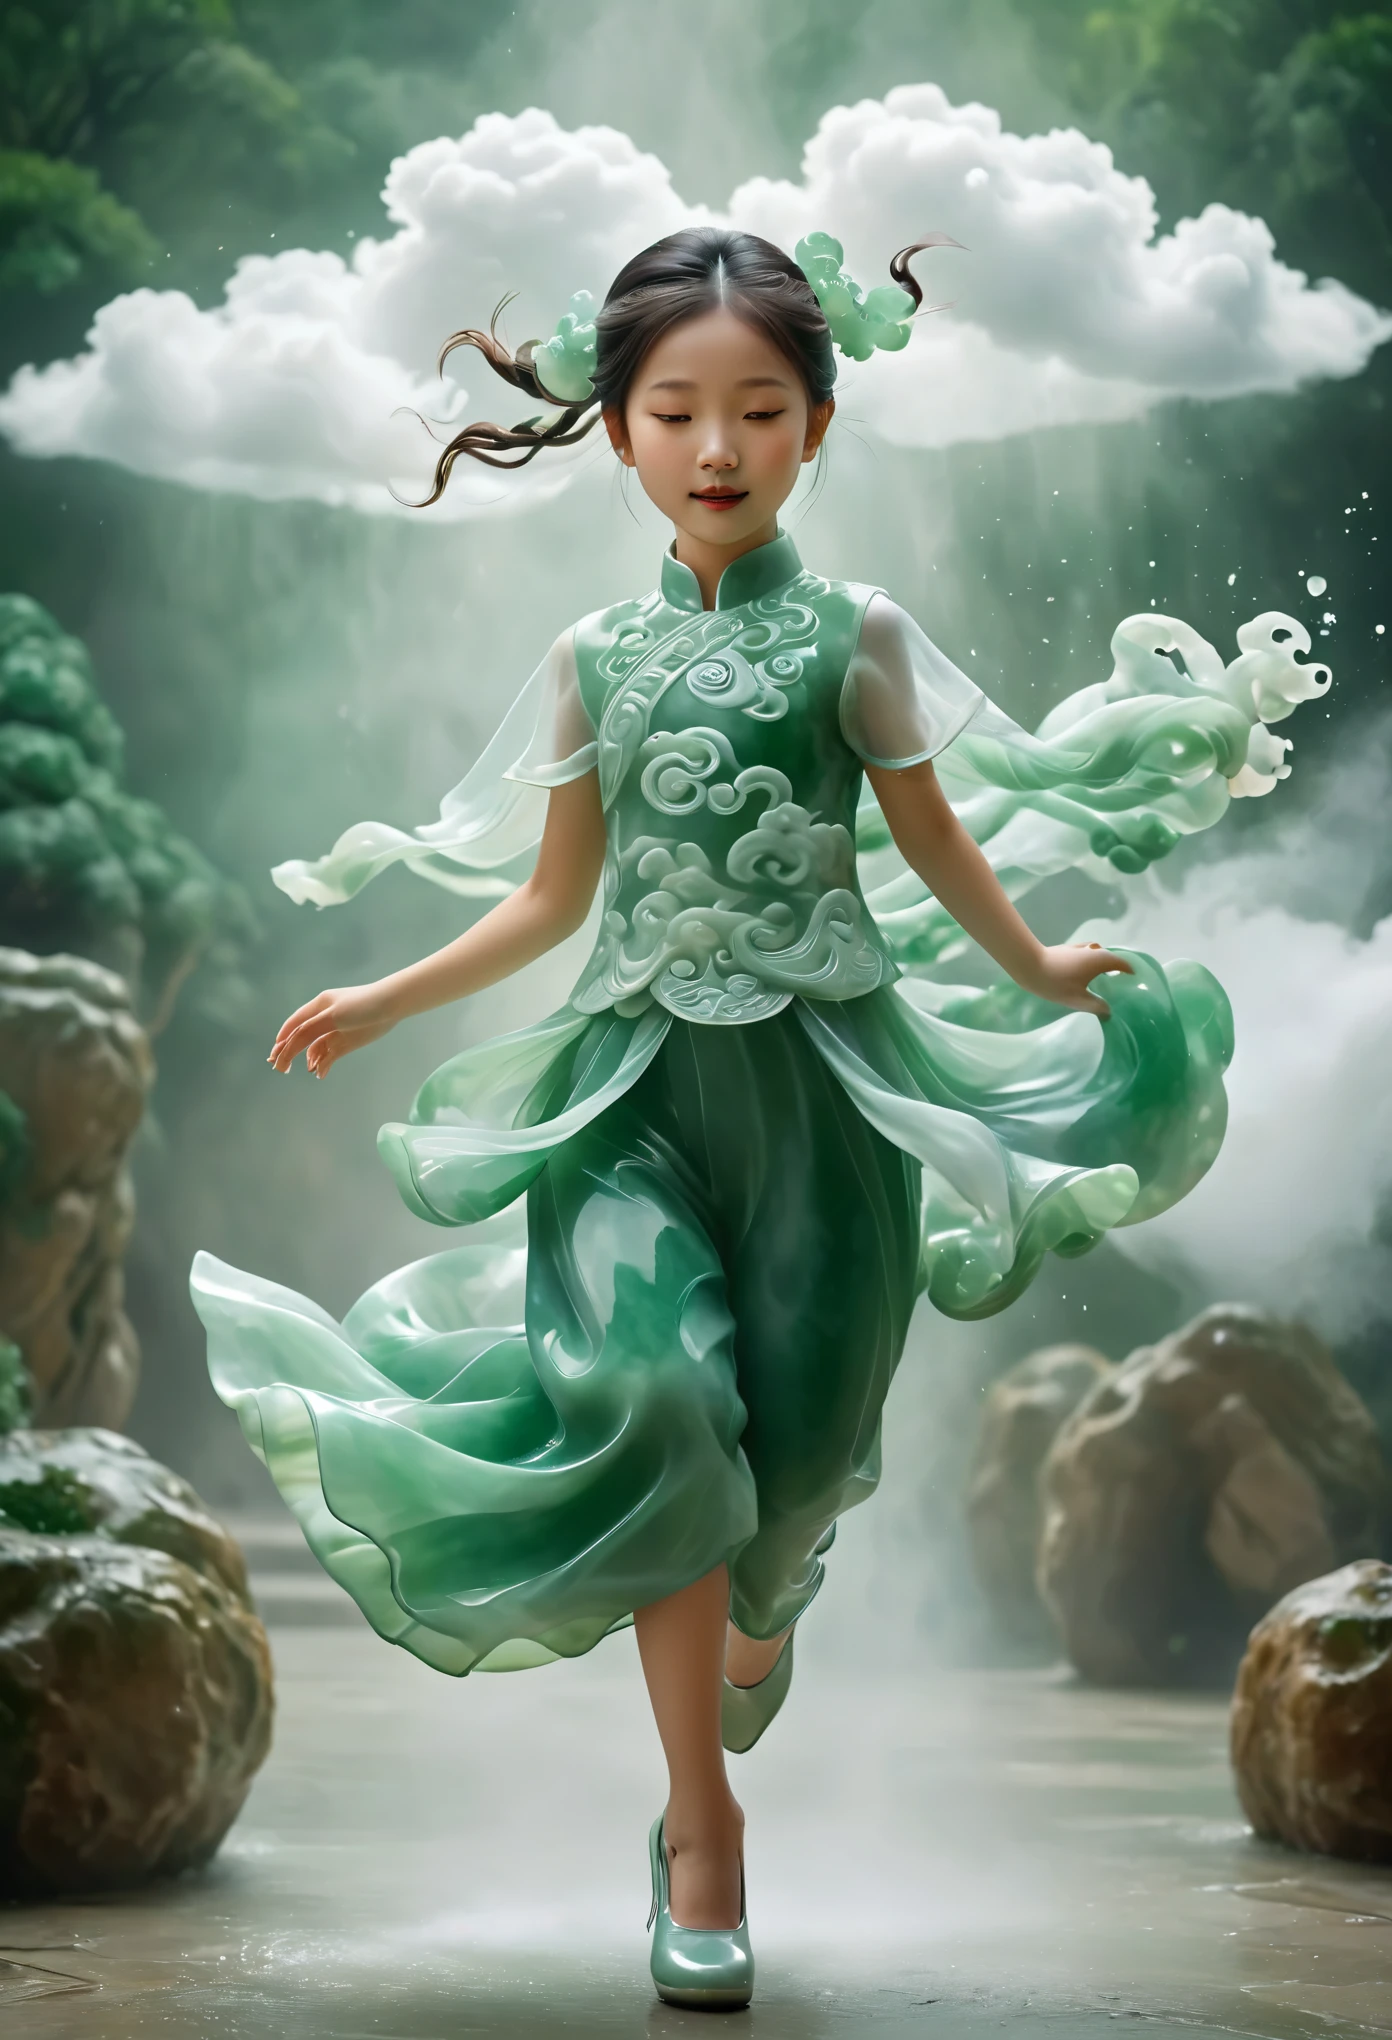 Photography of an adorable jade girl in modern attire, carrying a backpack, joyfully leaping and stepping on jade-colored auspicious clouds. Her entire body embodies the texture of jade, with hues of white and jade green, captured in a realistic photograph that showcases the fusion of human form and precious stone. The whimsical scene captures the girl's playful spirit as she dances above the clouds, blending the earthly with the ethereal in a visually enchanting composition